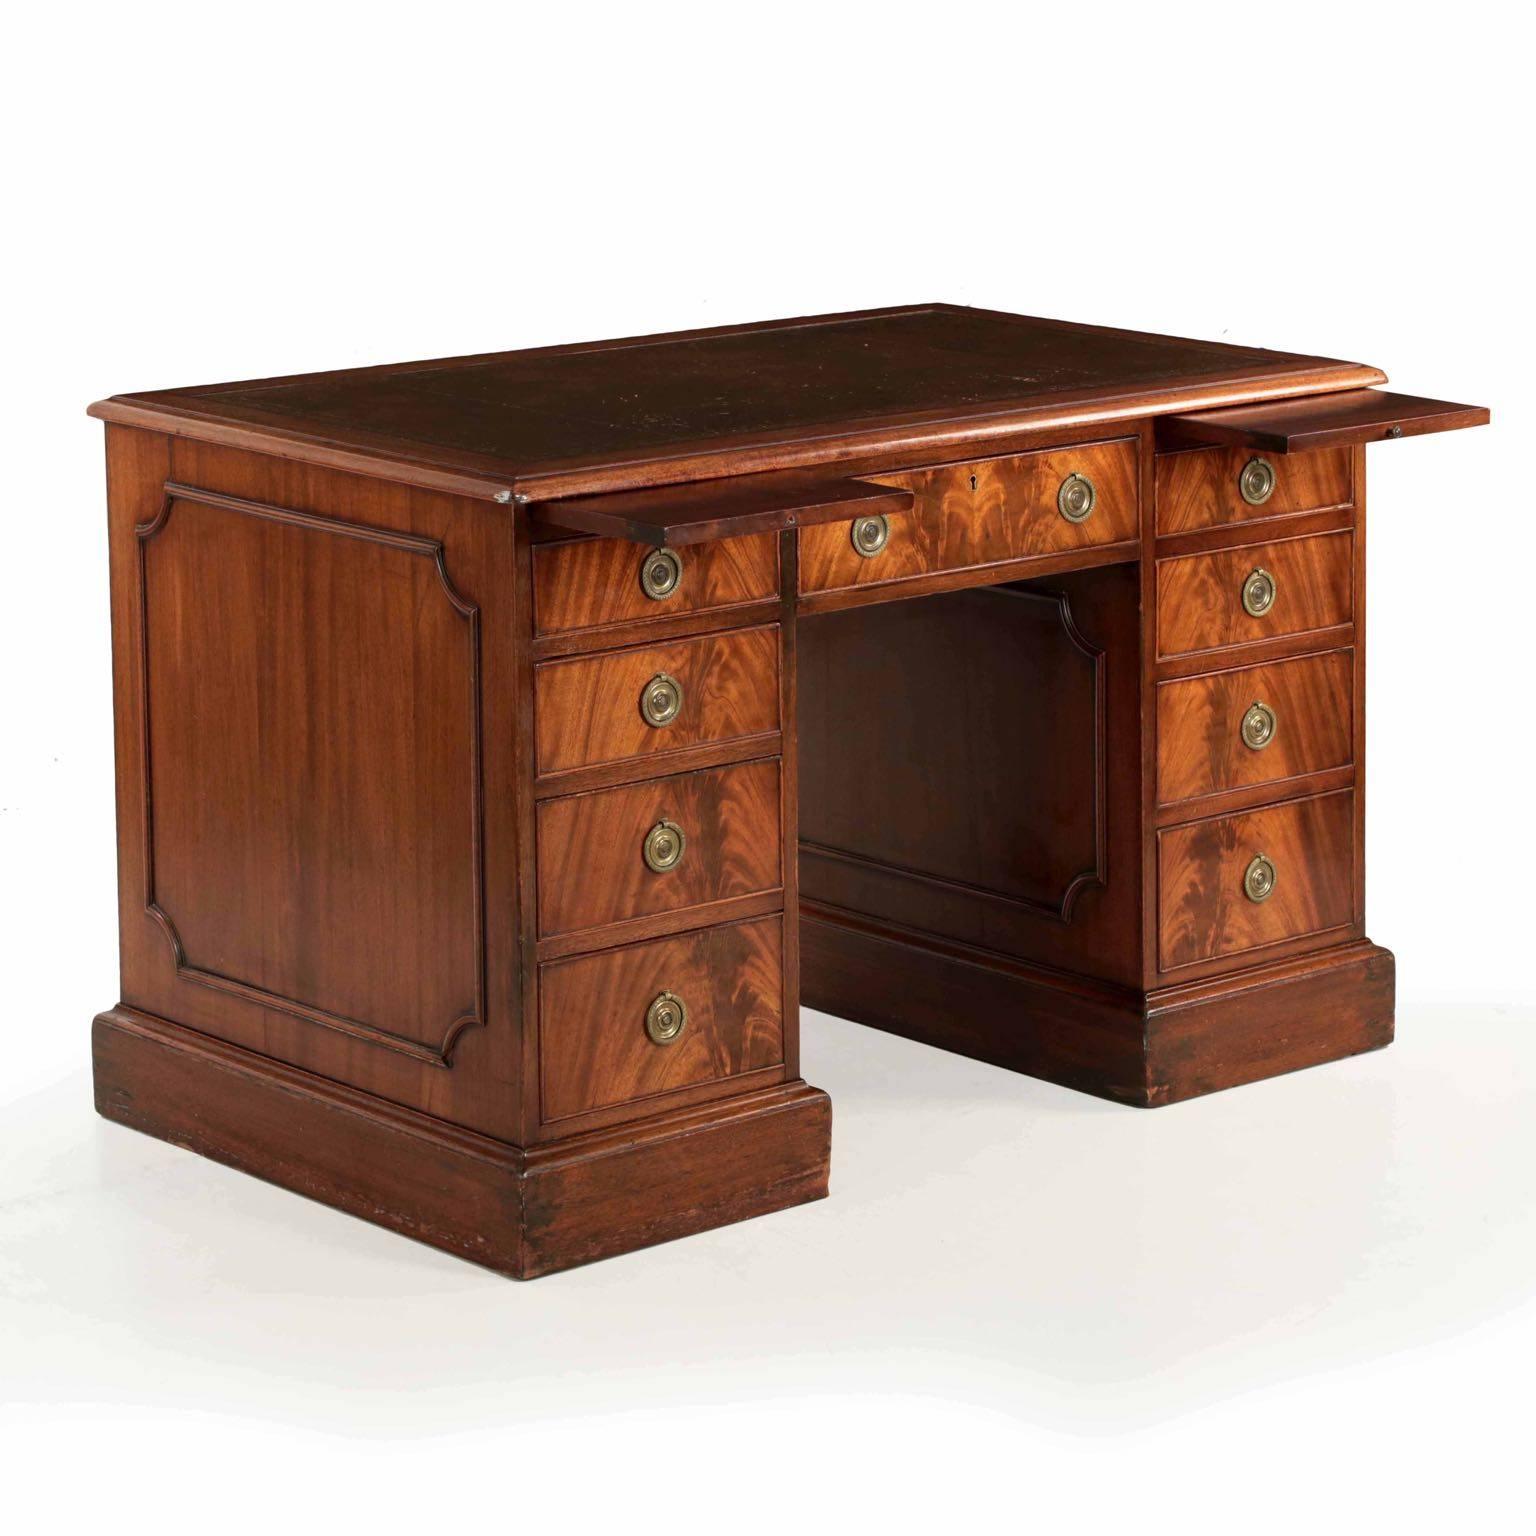 Noteworthy for the restrained size and excellent form, this gorgeous pedestal desk was crafted at the turn of the century closely after the Georgian taste of a century prior. The mahogany flames are match-booked with perfect symmetry between every